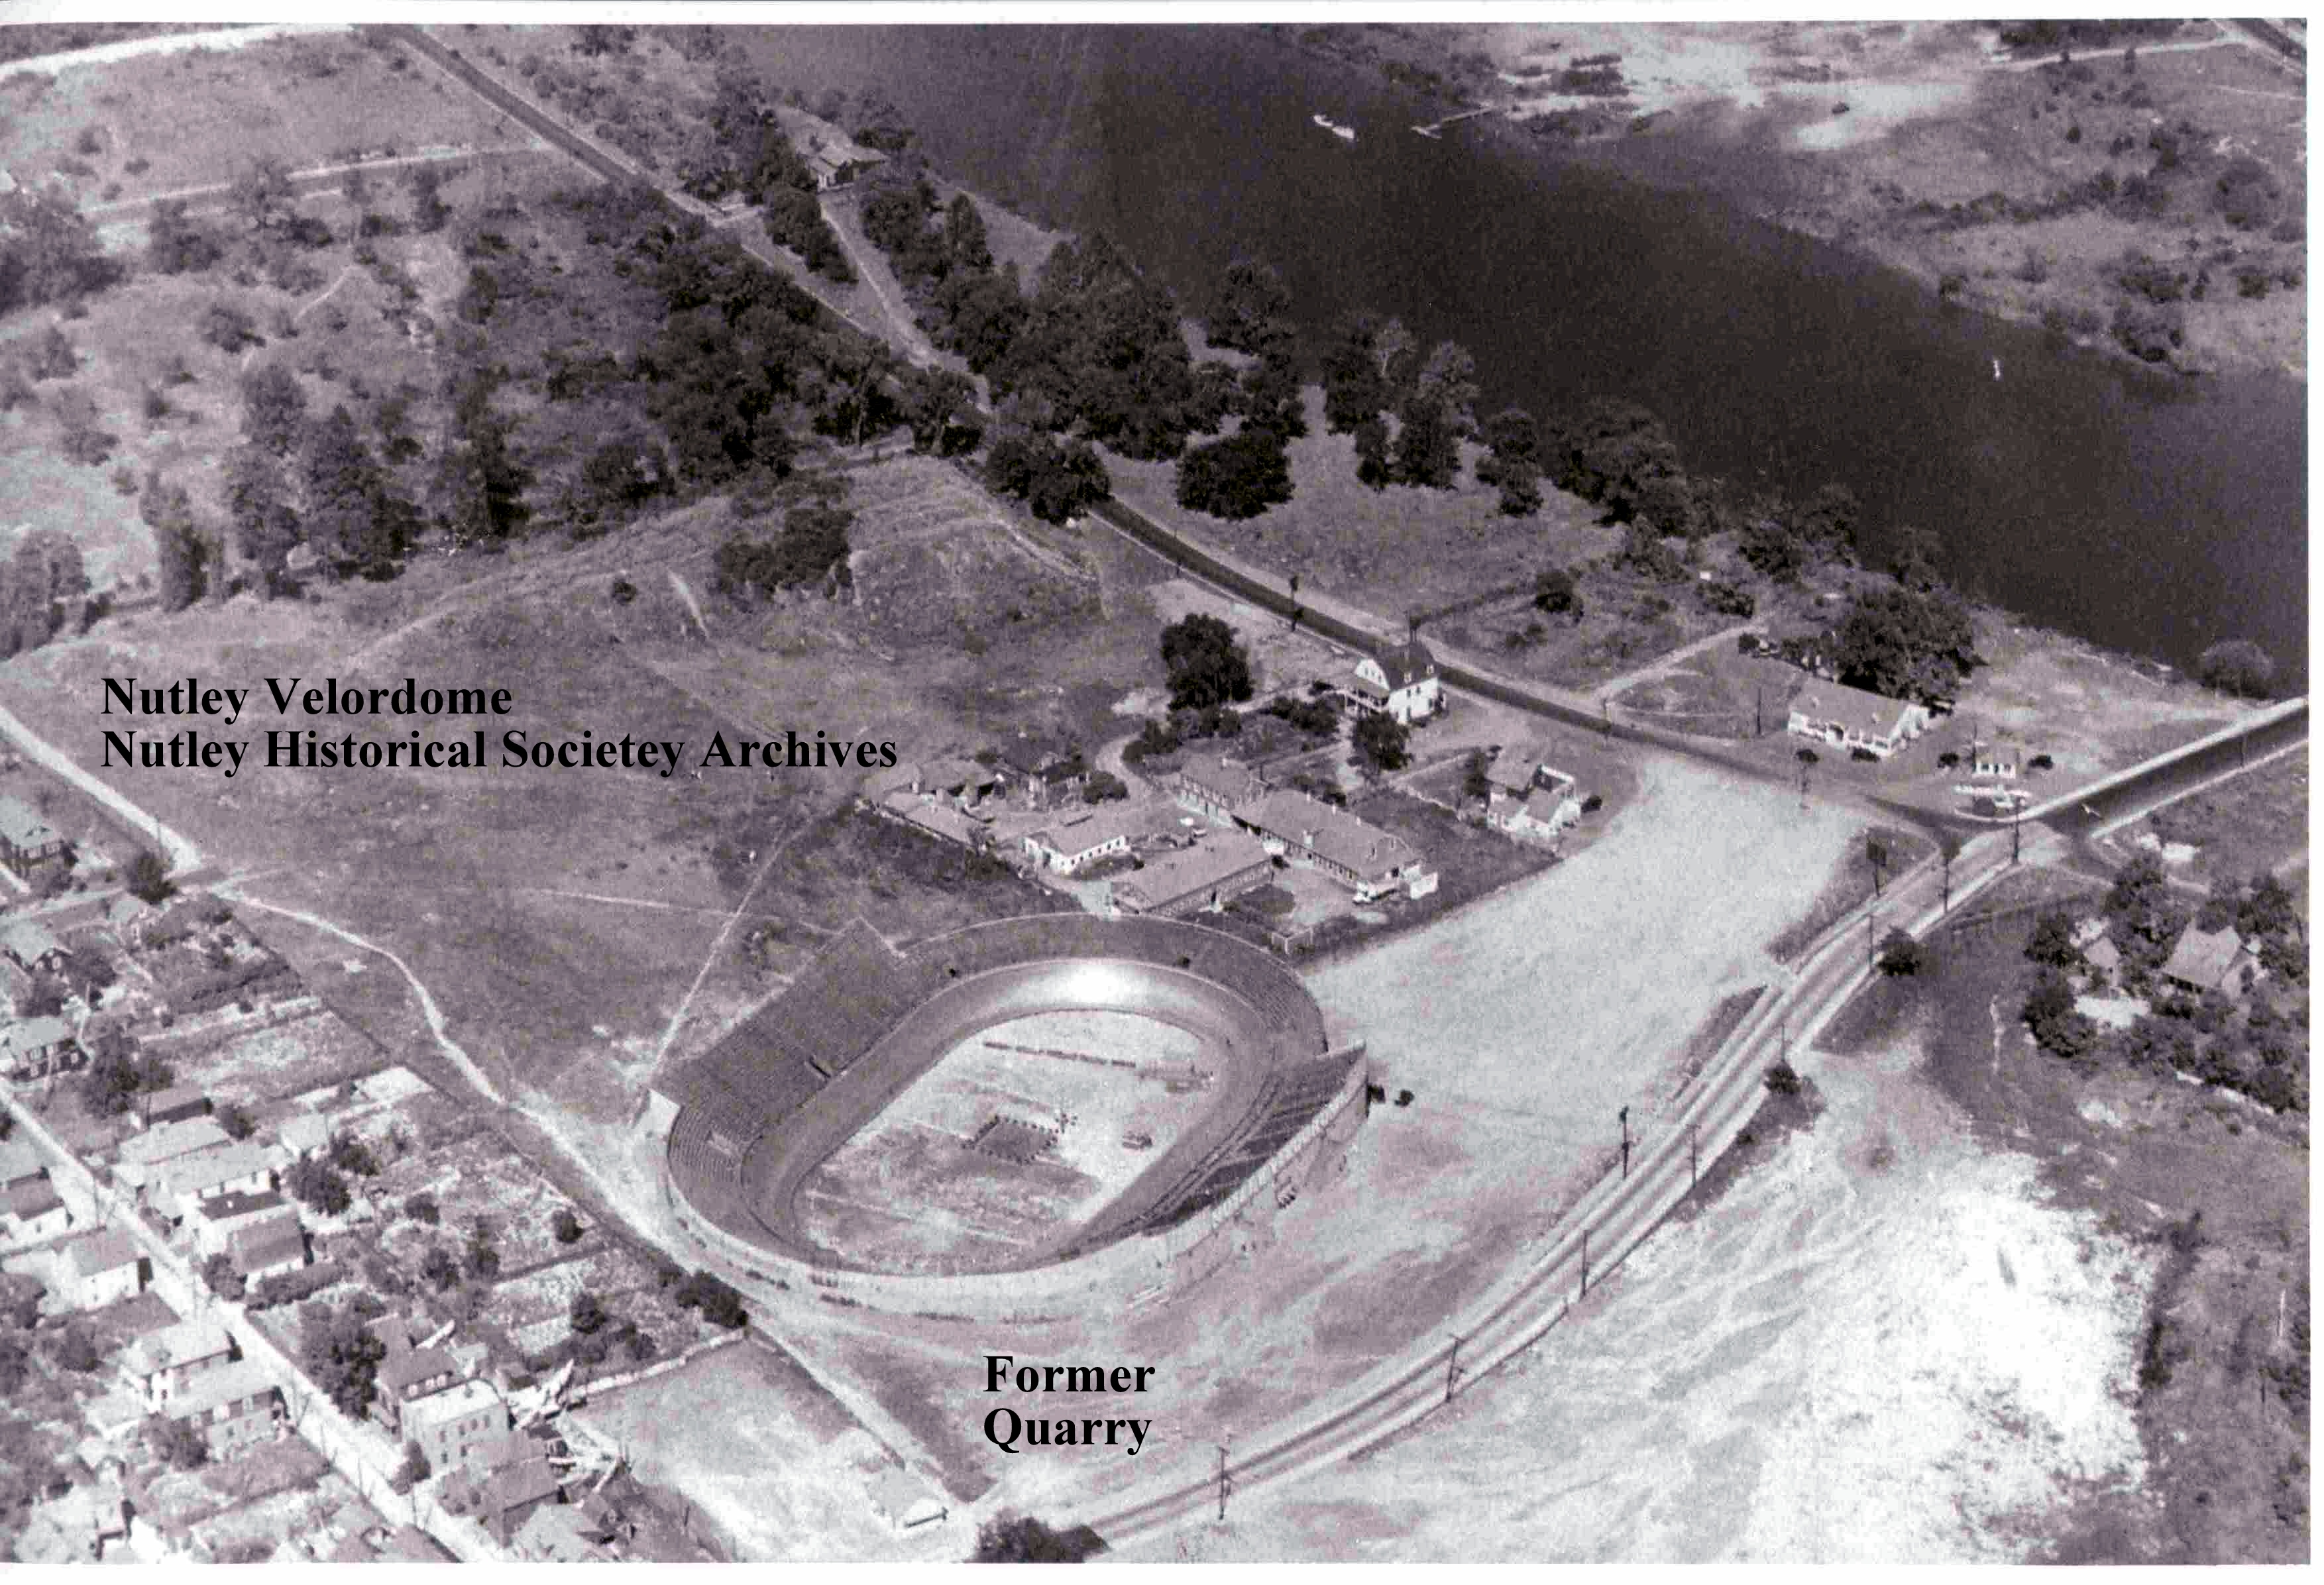 Nutley Velodrome, midget car and bicycle racing, former Quarry Lake, Avondale, Nutley NJ, Nutley Historical Society